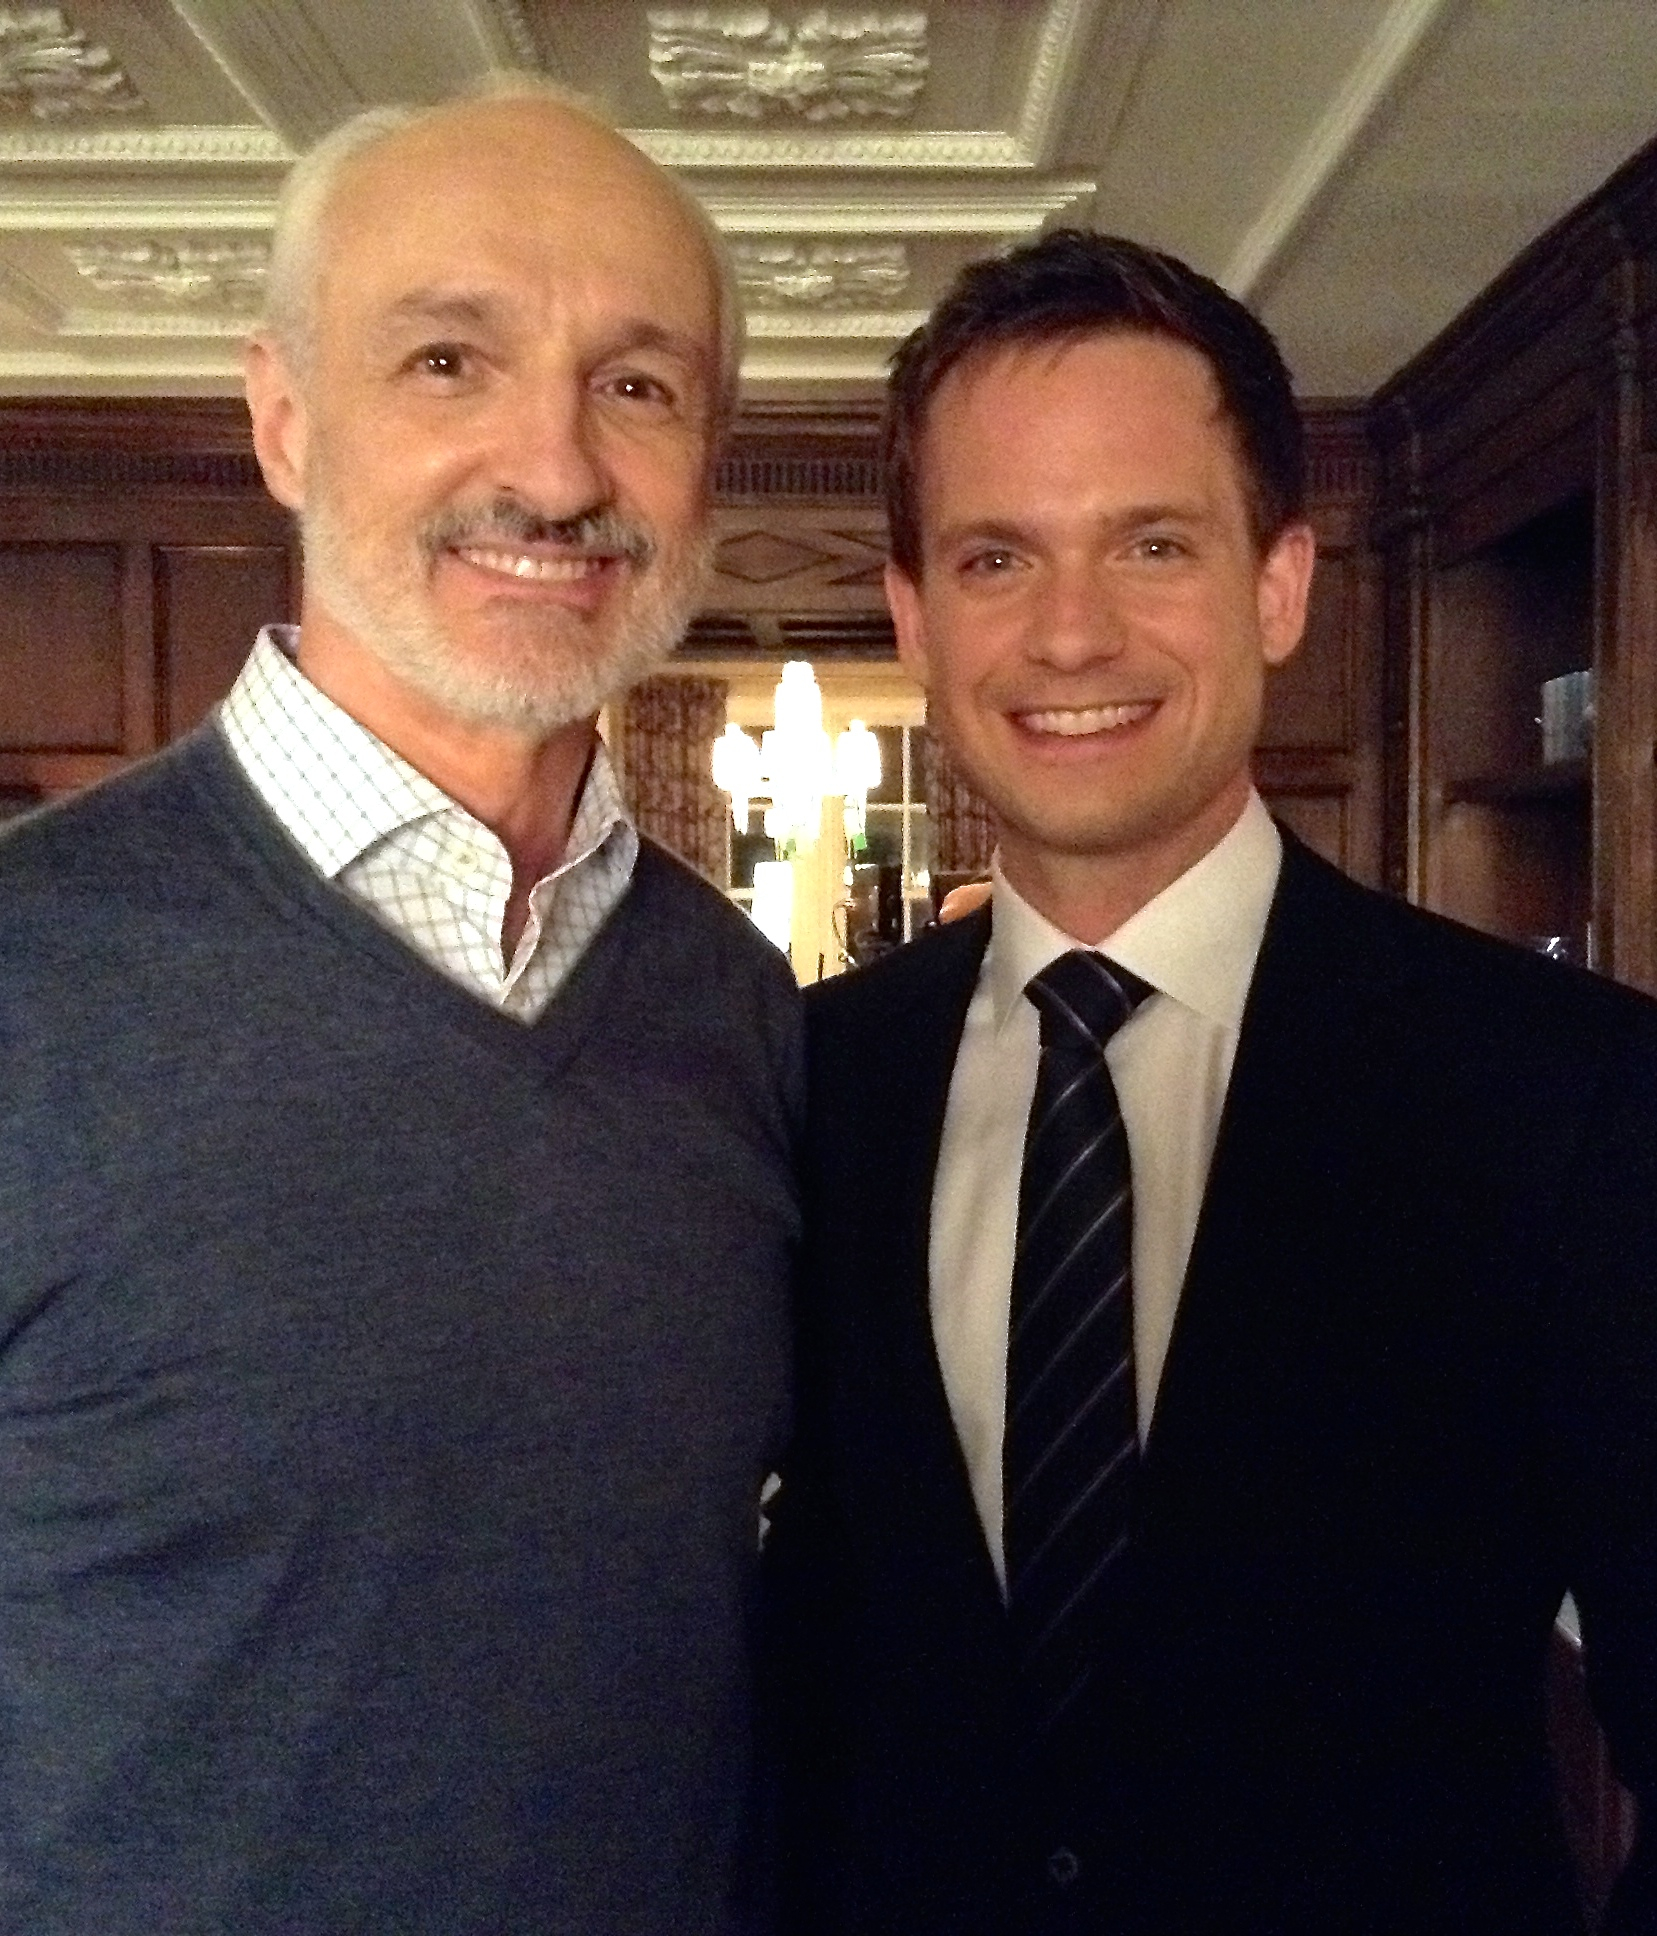 Michael Gross and Patrick J. Adams on the set of SUITS. Michael reoccurs as character 